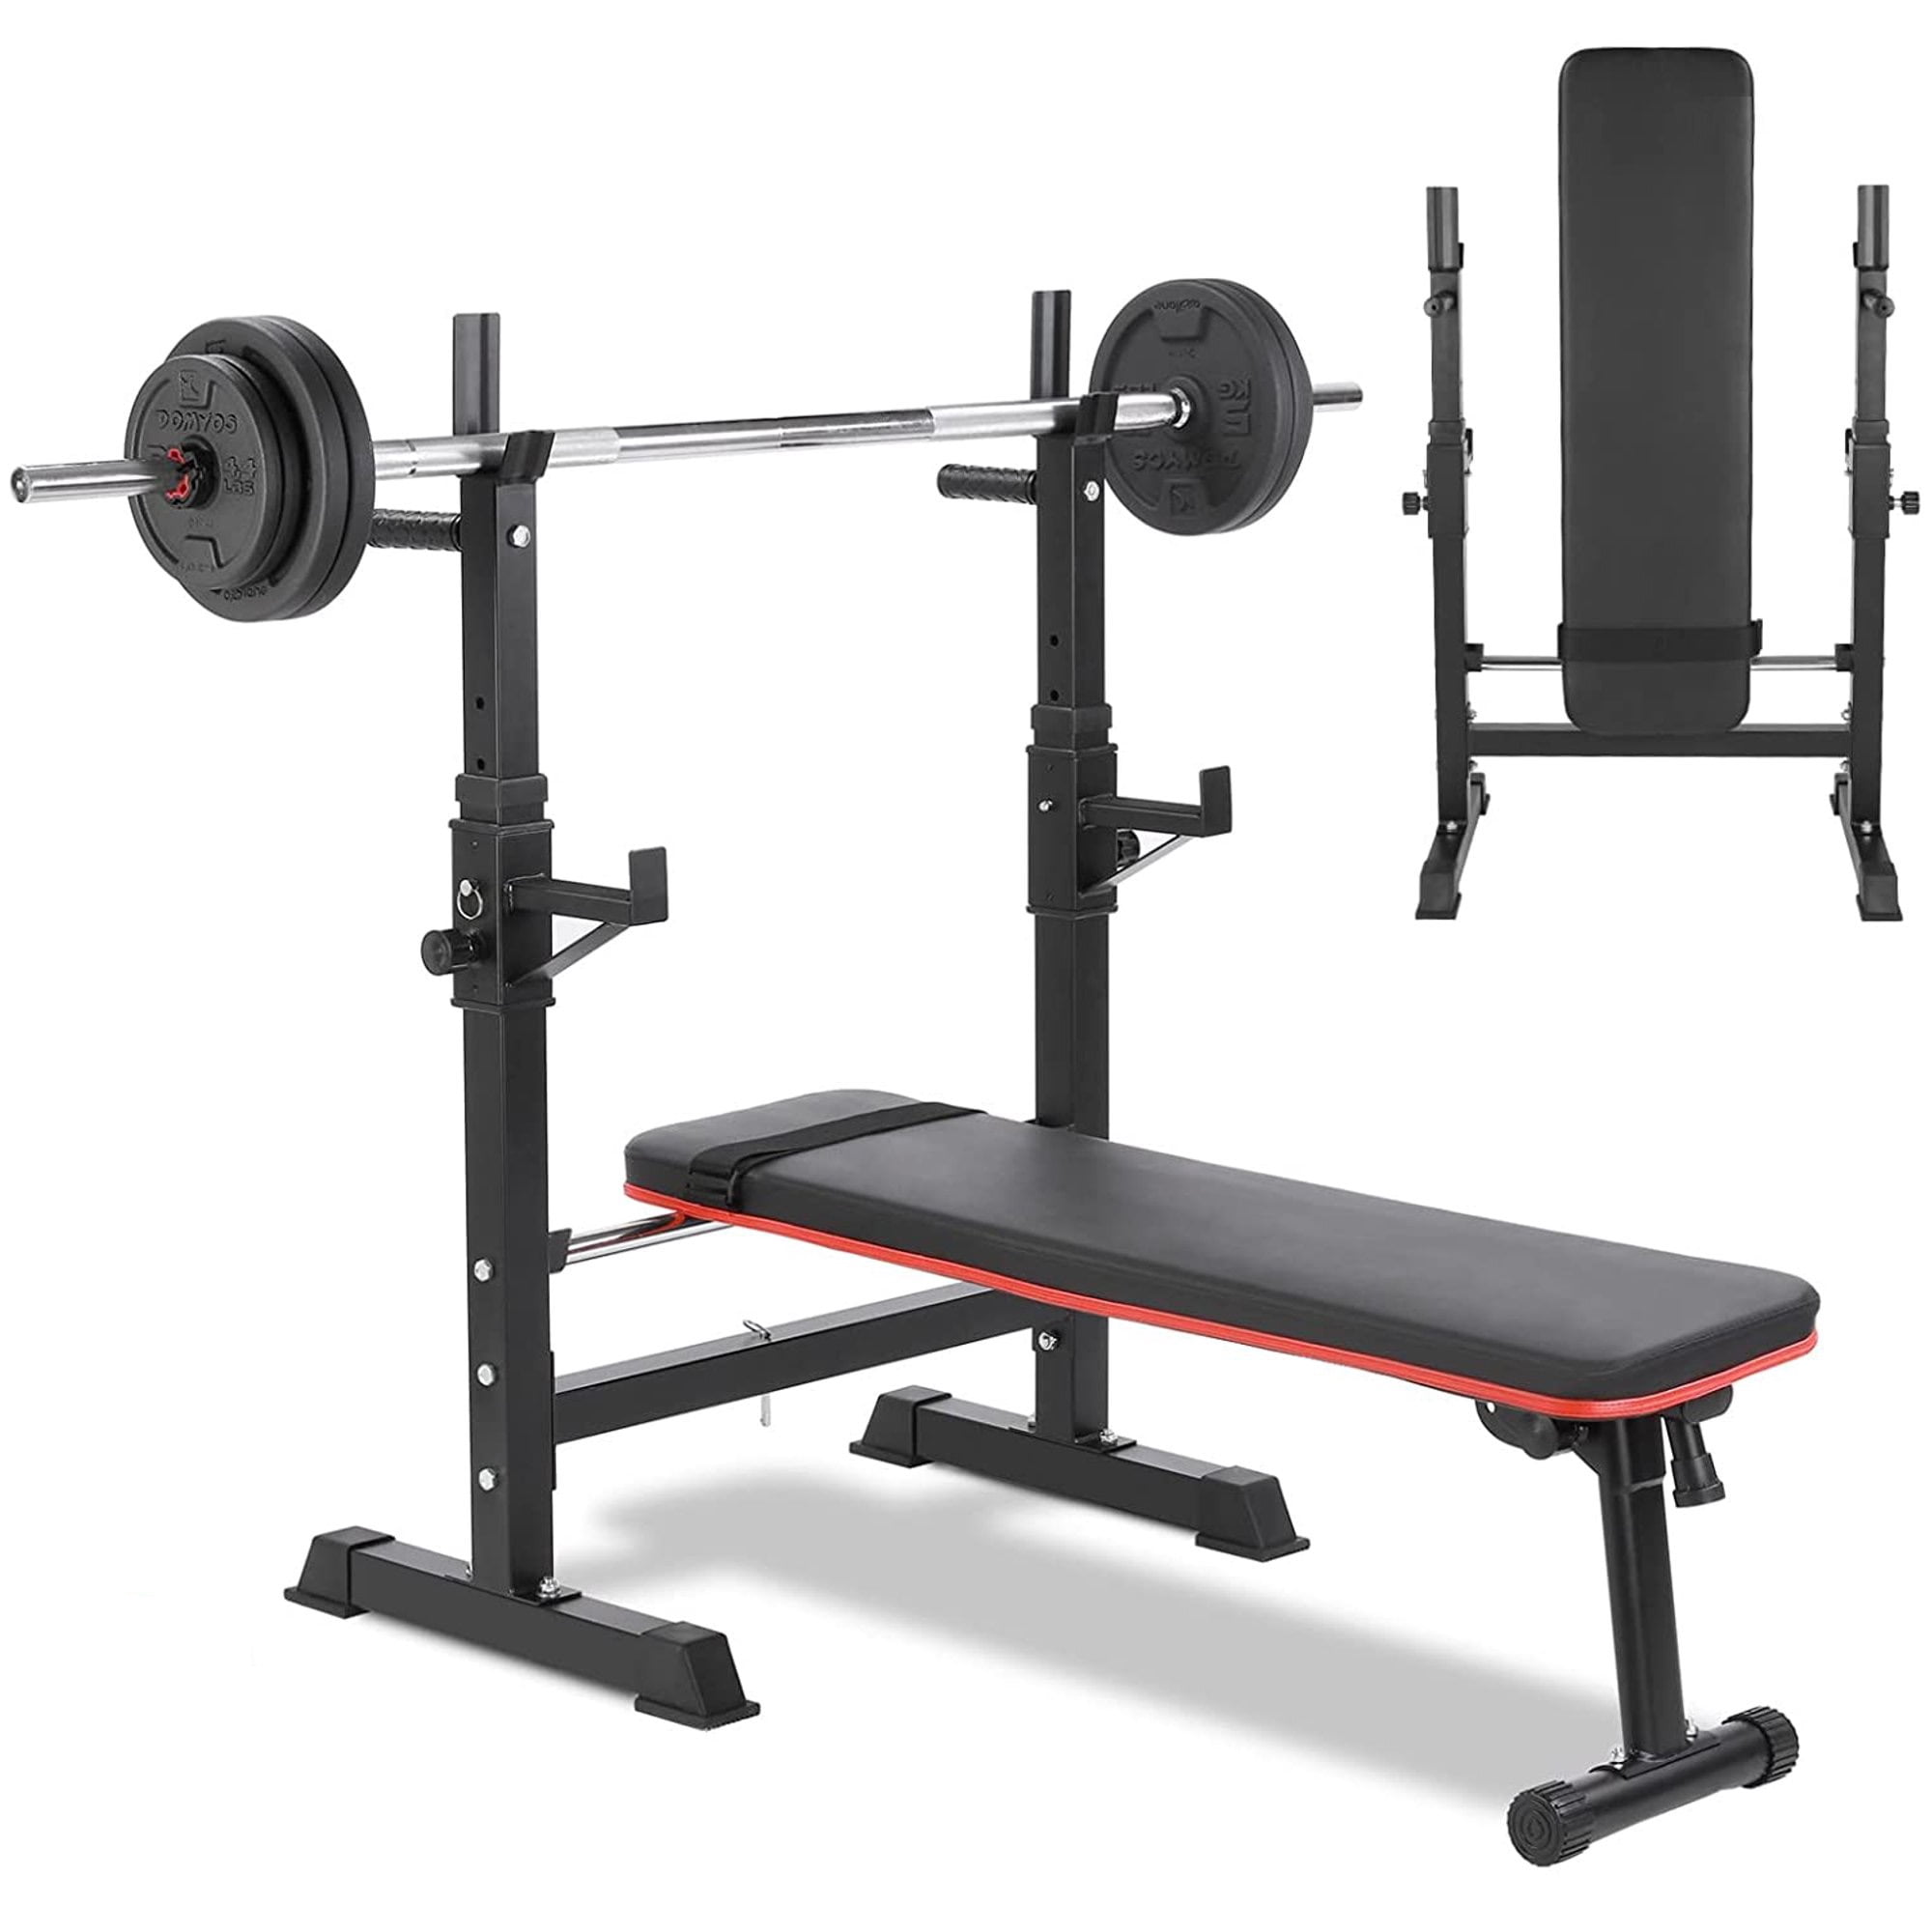 Color:red Olympic Workout Bench for Home Gym Strength Training Weight Bench Foldable Incline Decline Bench with Height Adjustable Squat Rack Weightlifting Bench with Rack 